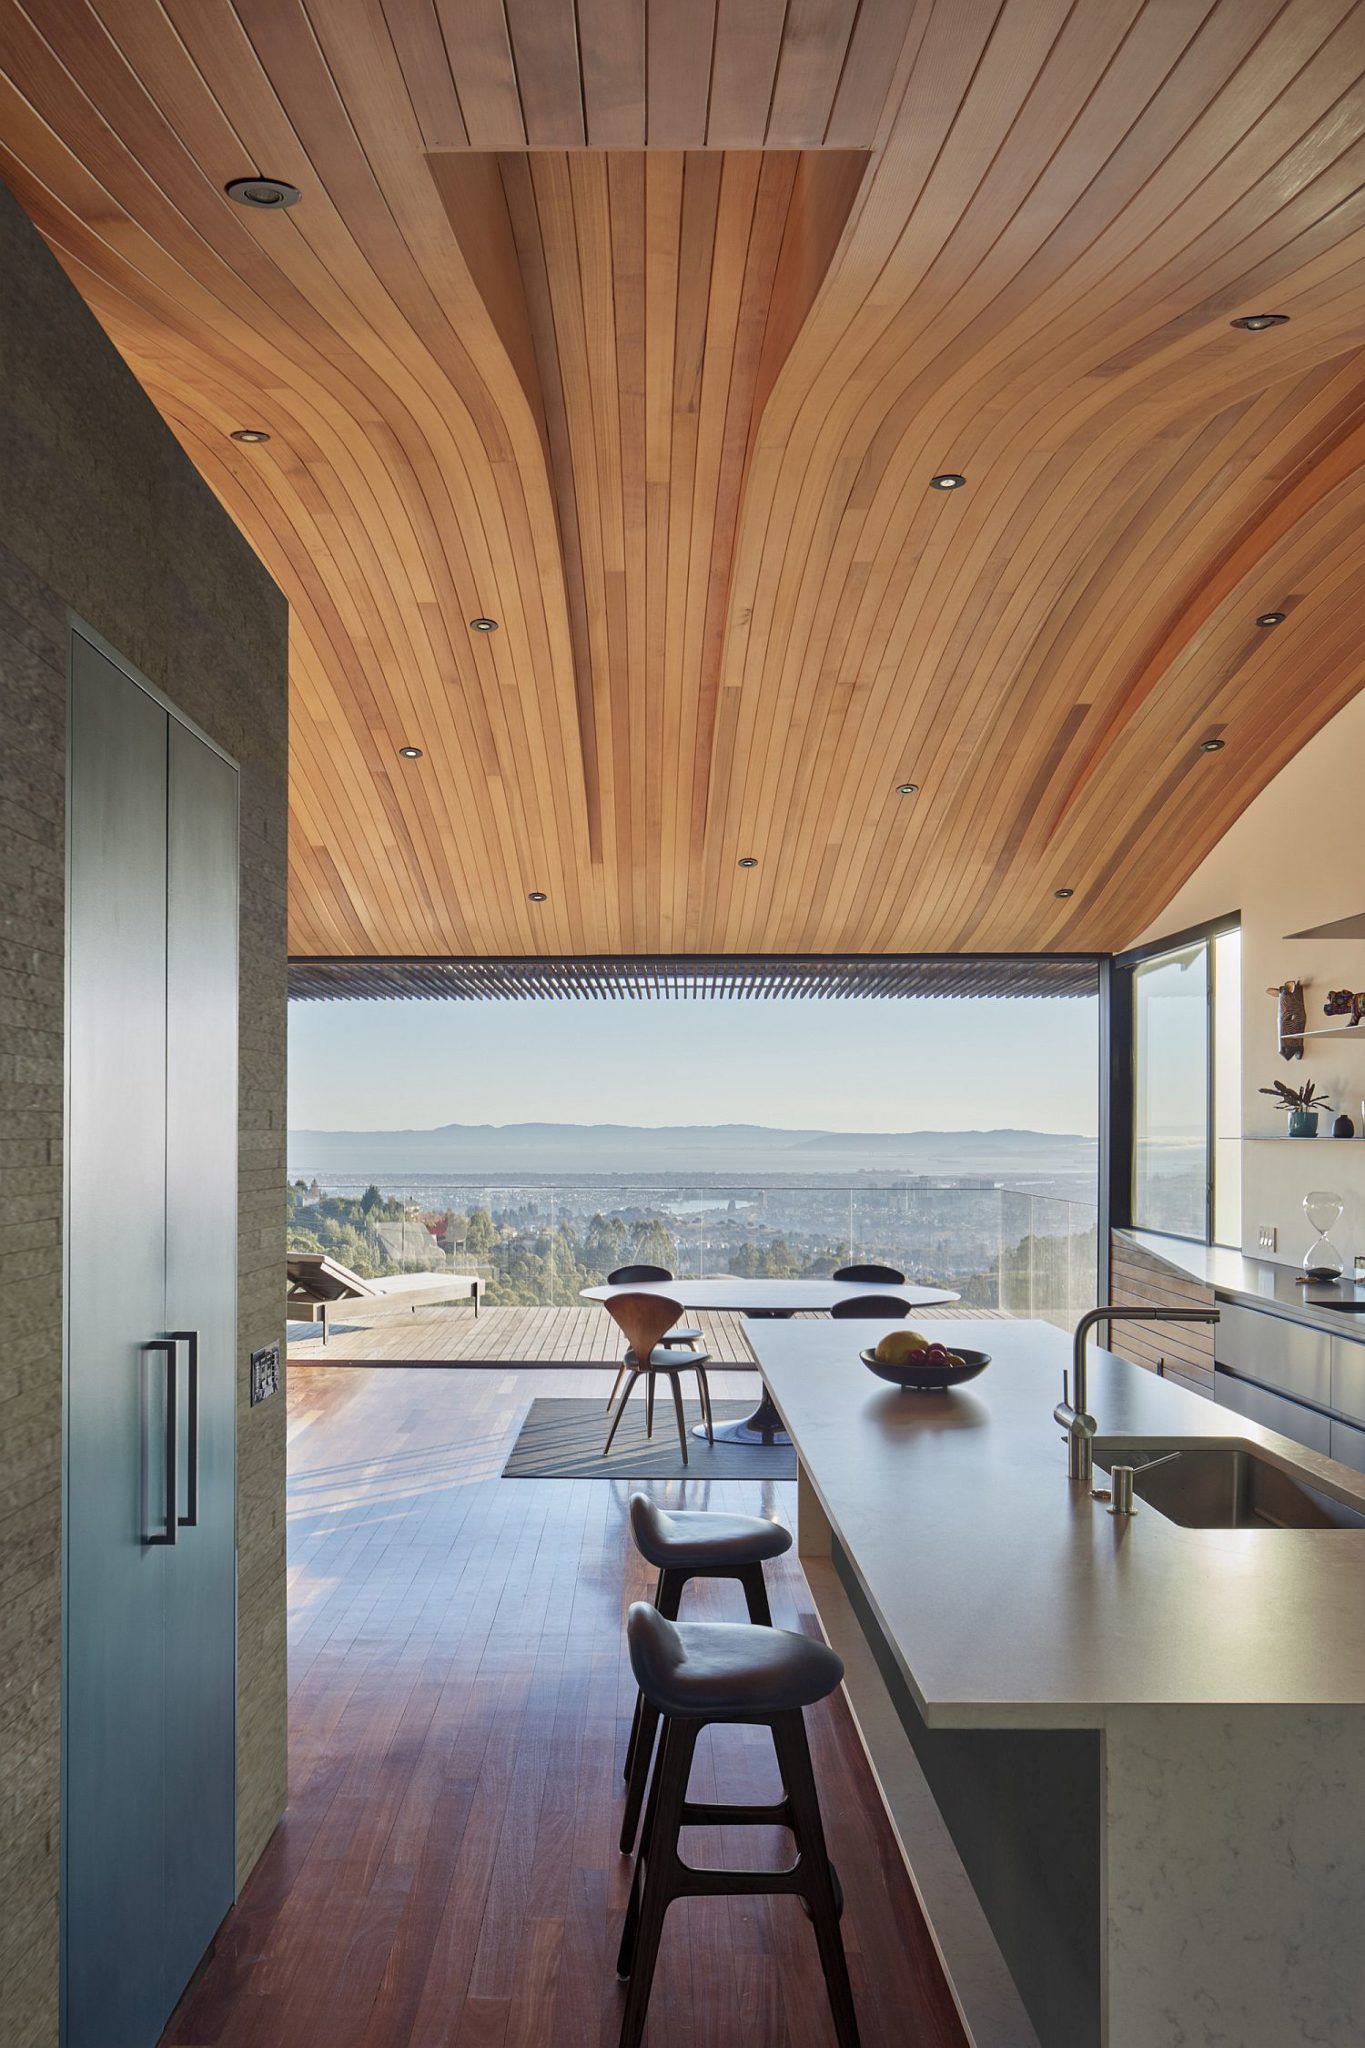 Wood-tube-for-the-open-common-space-gives-the-ceiling-a-curved-design